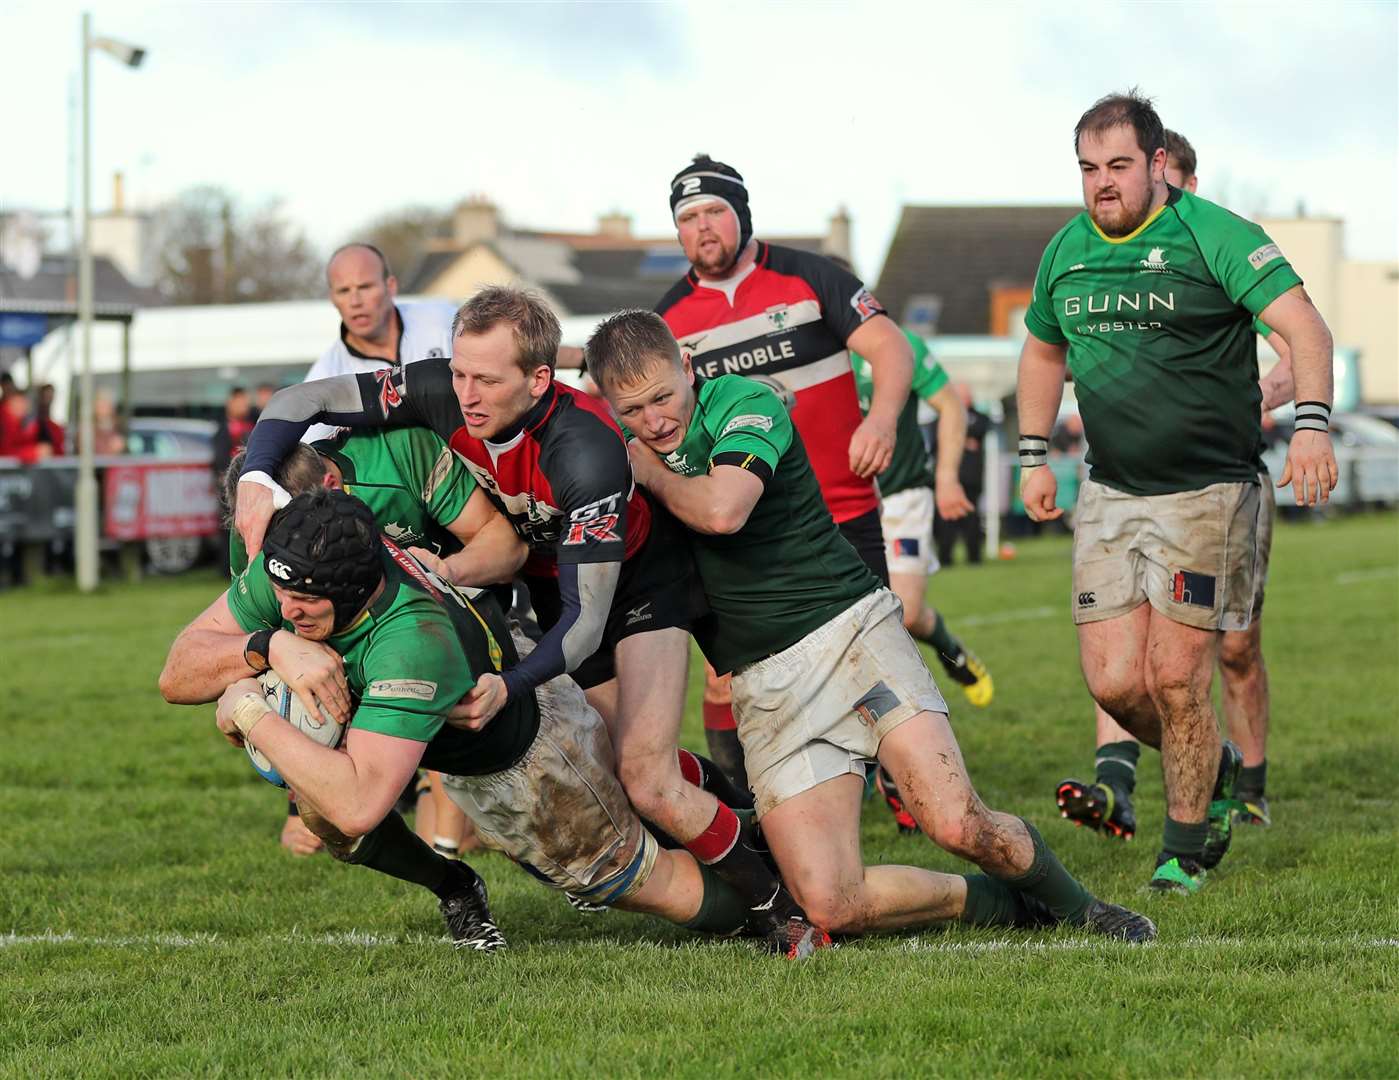 Kevin Budge goes over the line to score a try for the Greens against Lasswade.